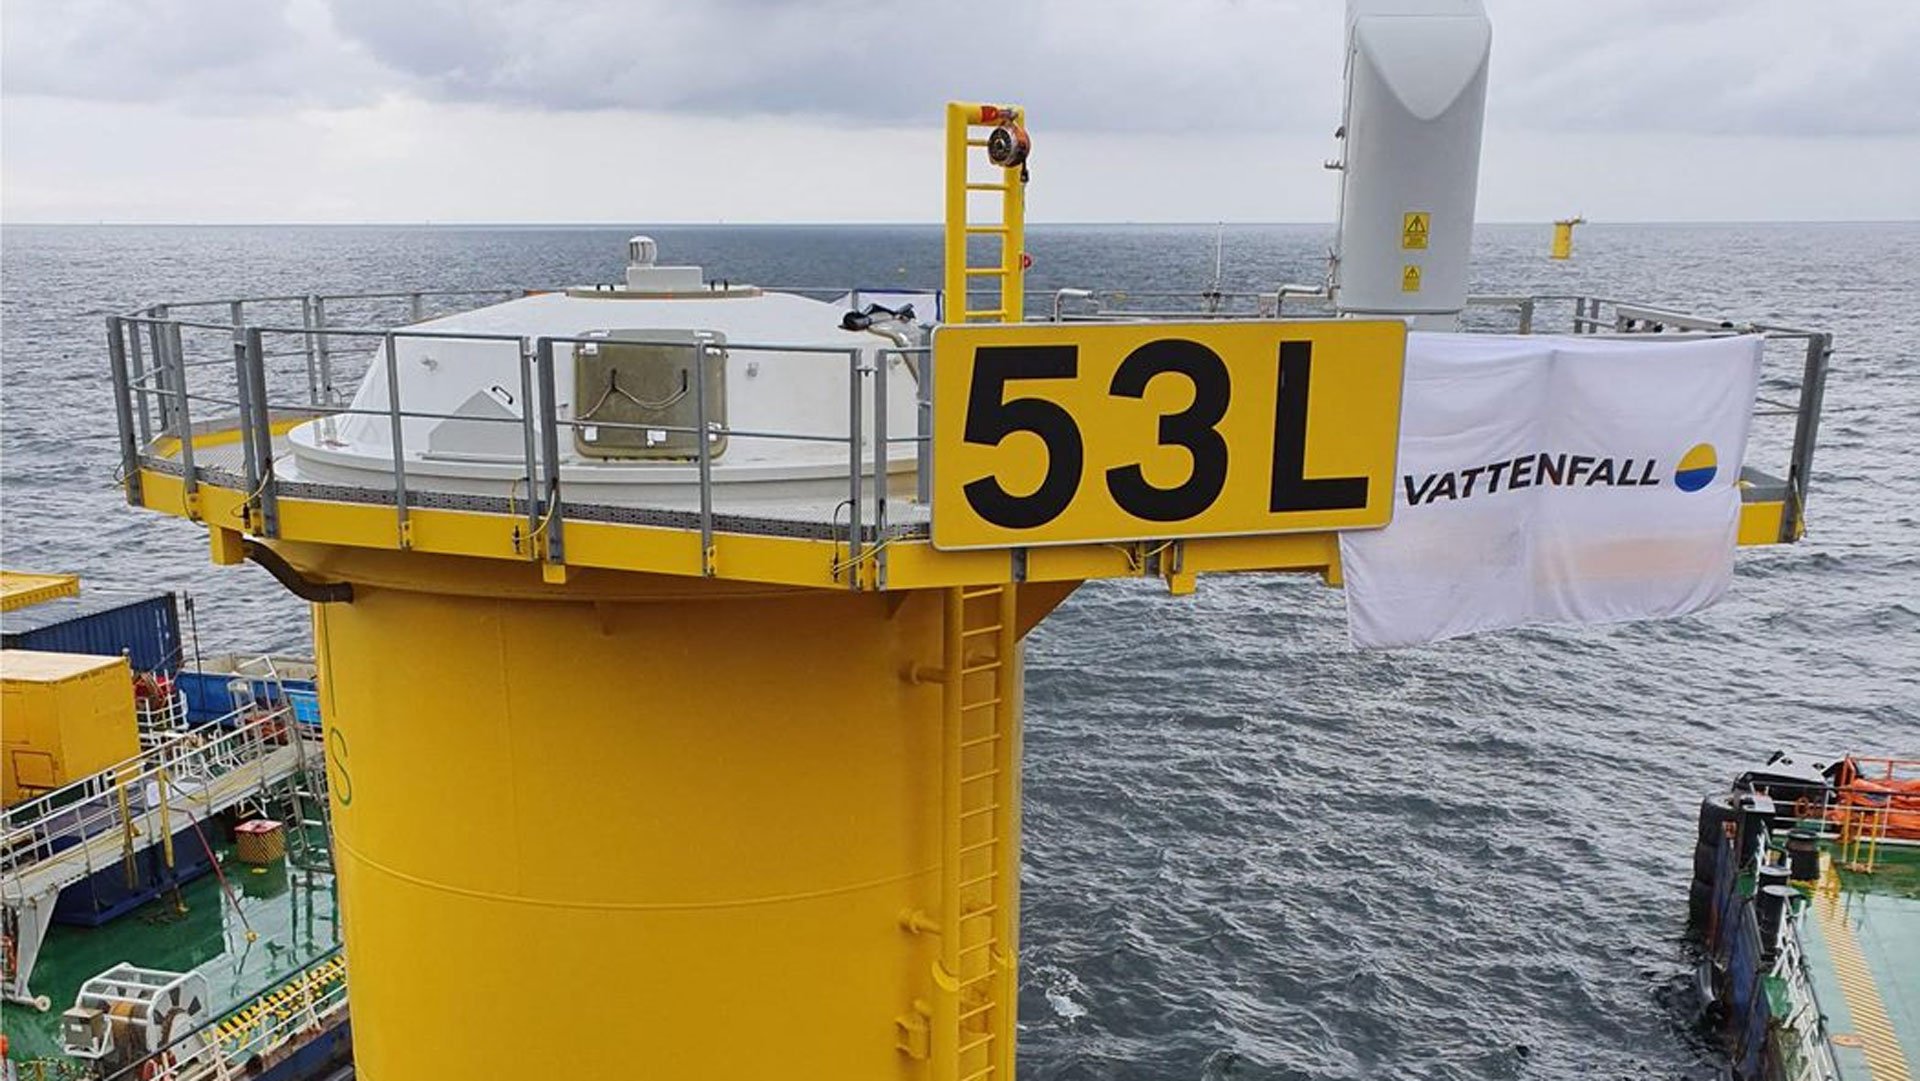 On Friday, the 72nd and last foundation for Kriegers Flak Offshore Wind Farm was successfully placed in the Baltic Sea.